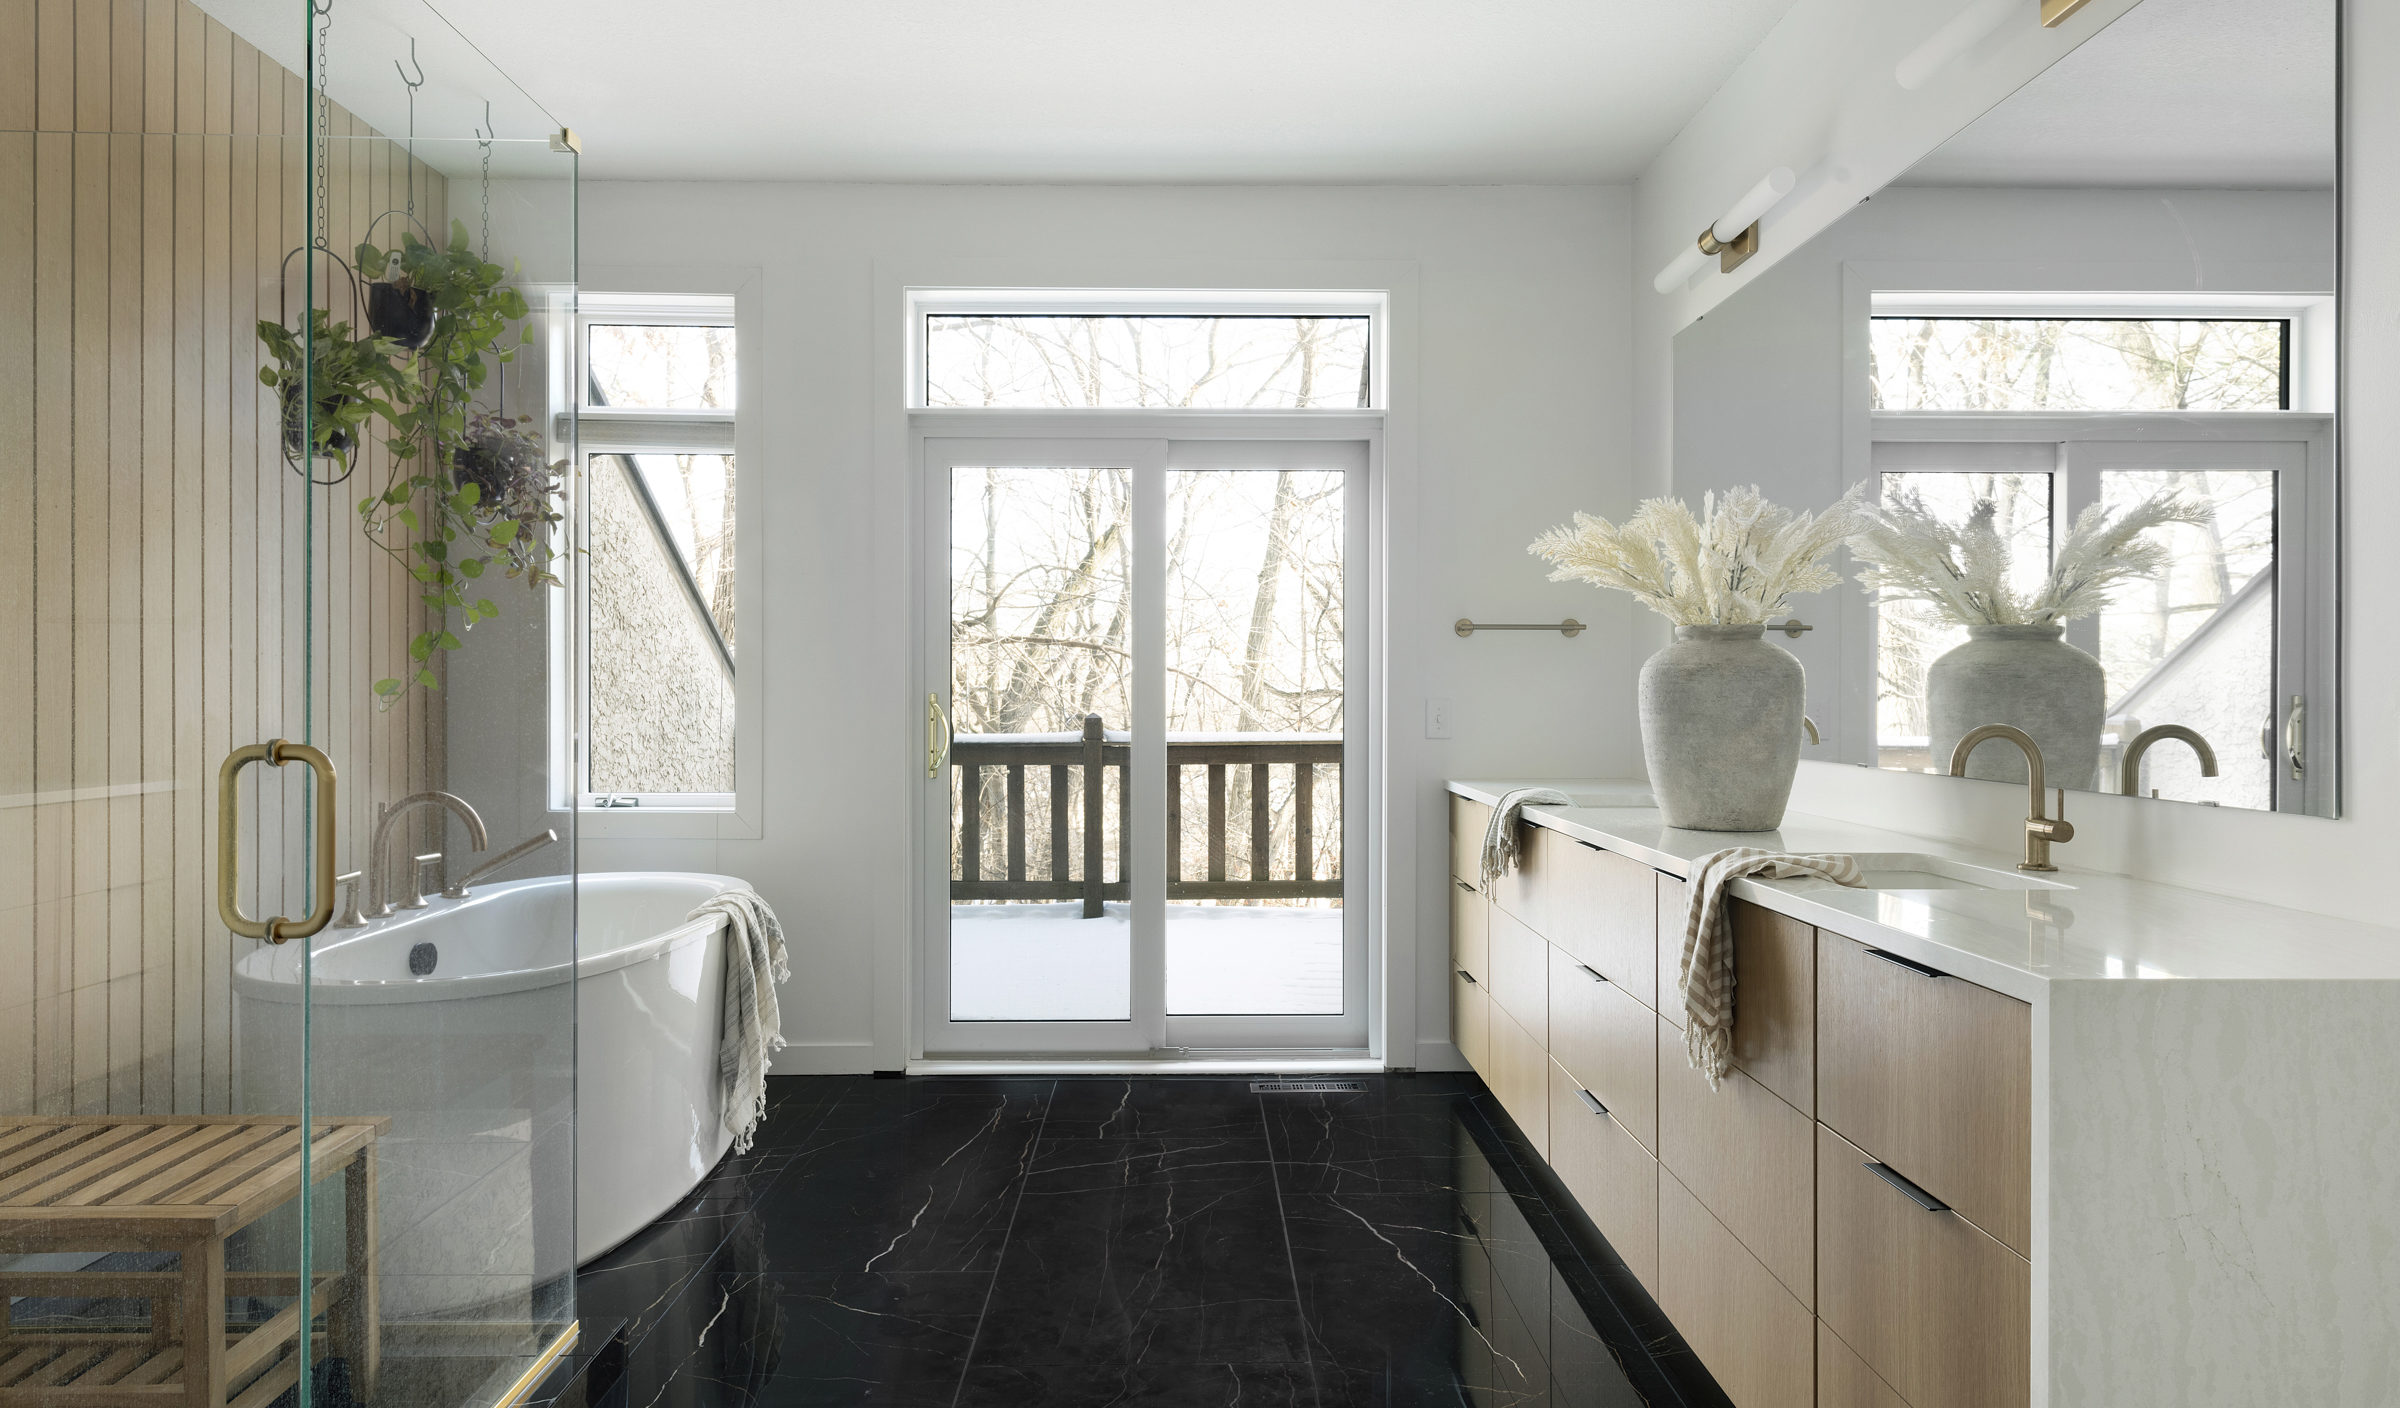 White and black bathroom design | construction2style